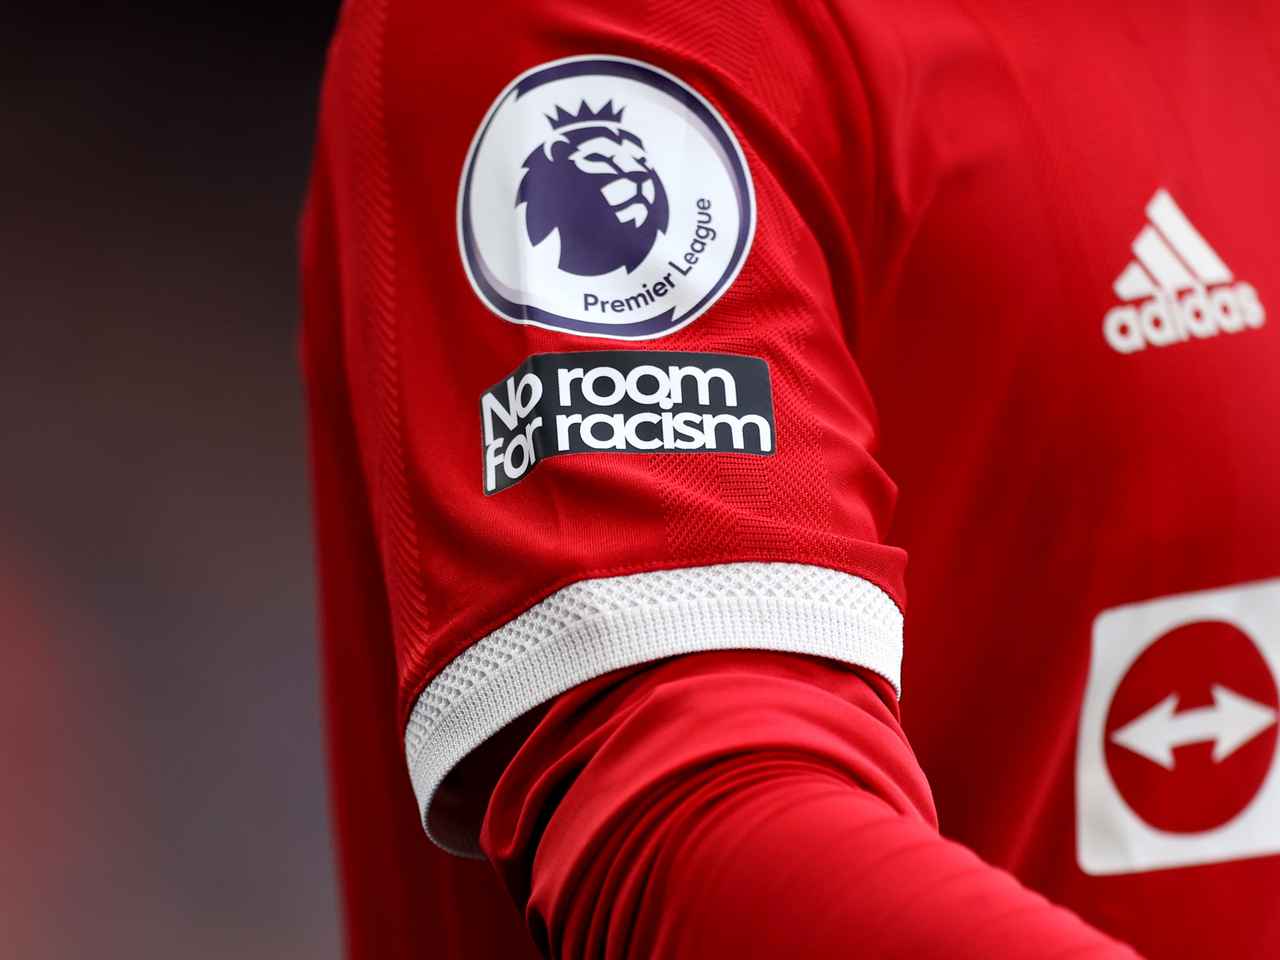 The 'No Room For Racism' logo can be seen in every Premier League jersey.